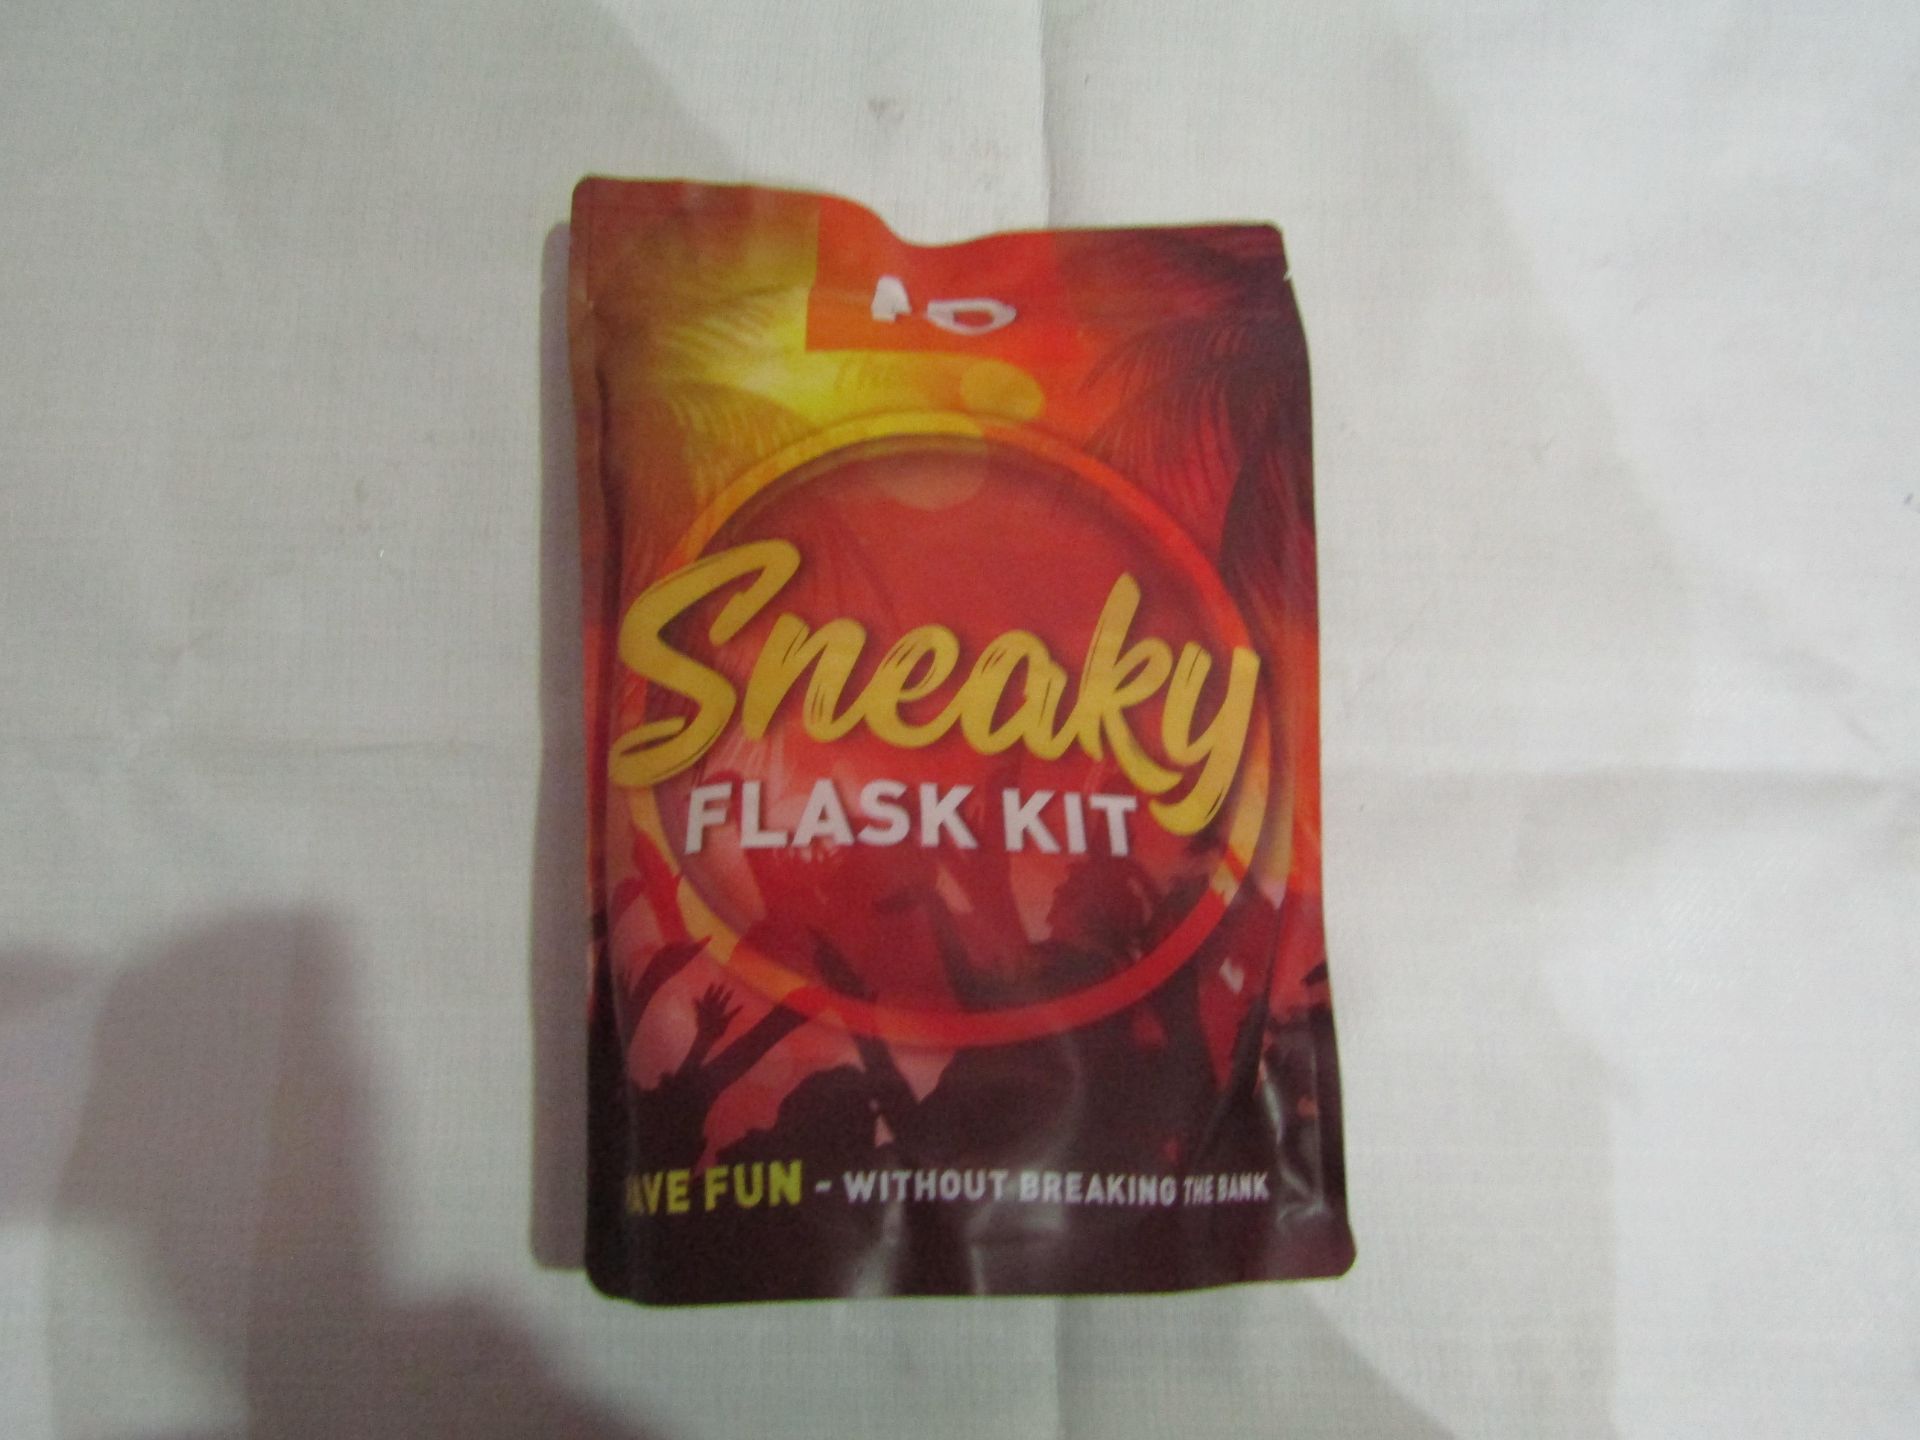 Box Of 30x ND Sneaky Flask Kit - New & Packaged.